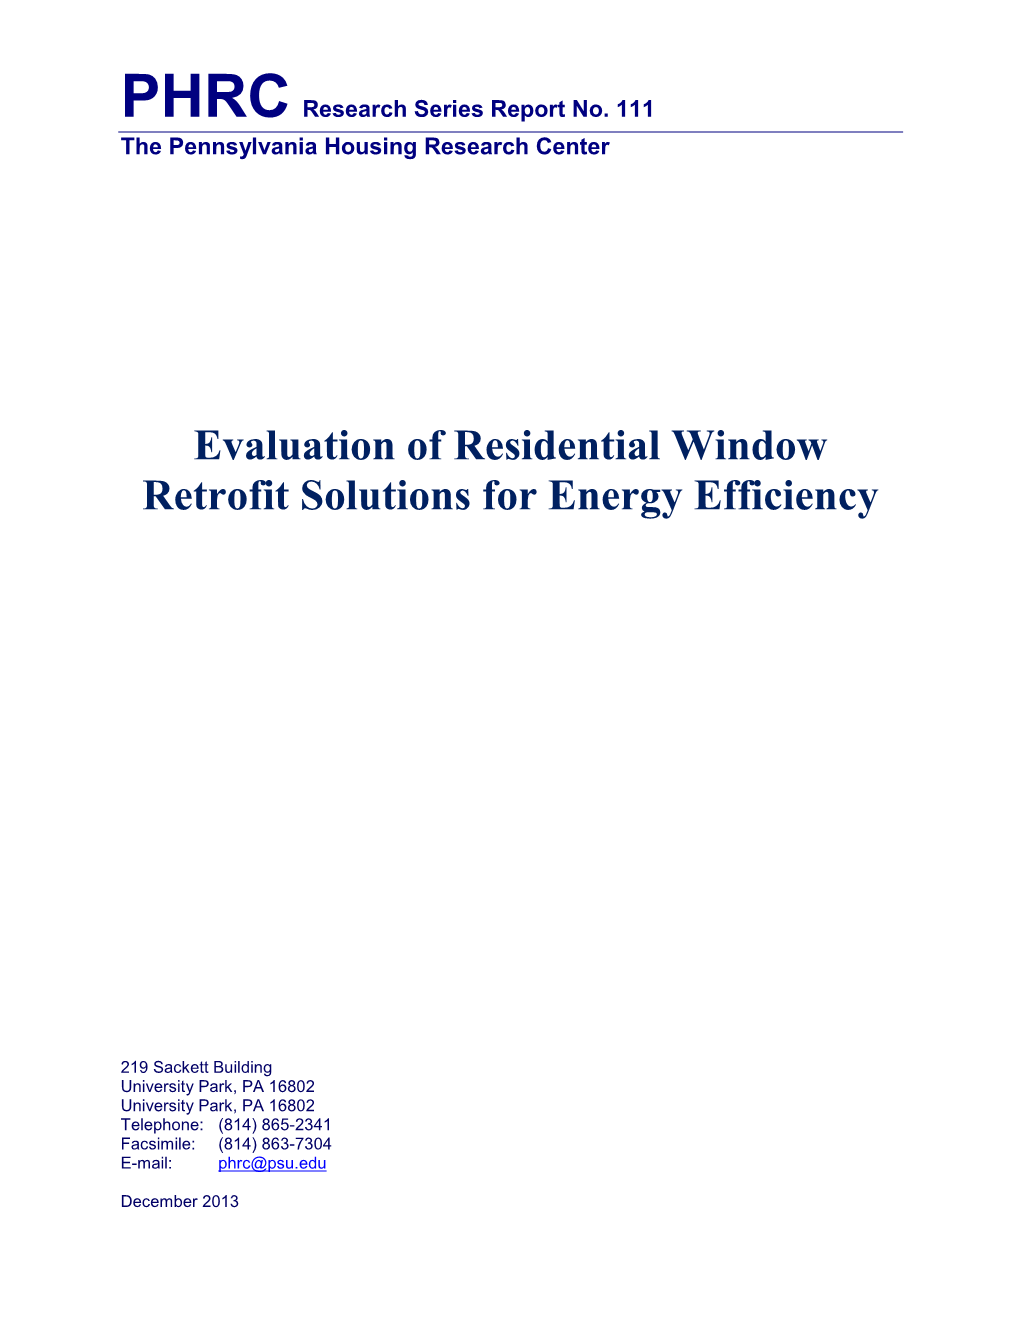 Evaluation of Residential Window Retrofit Solutions for Energy Efficiency